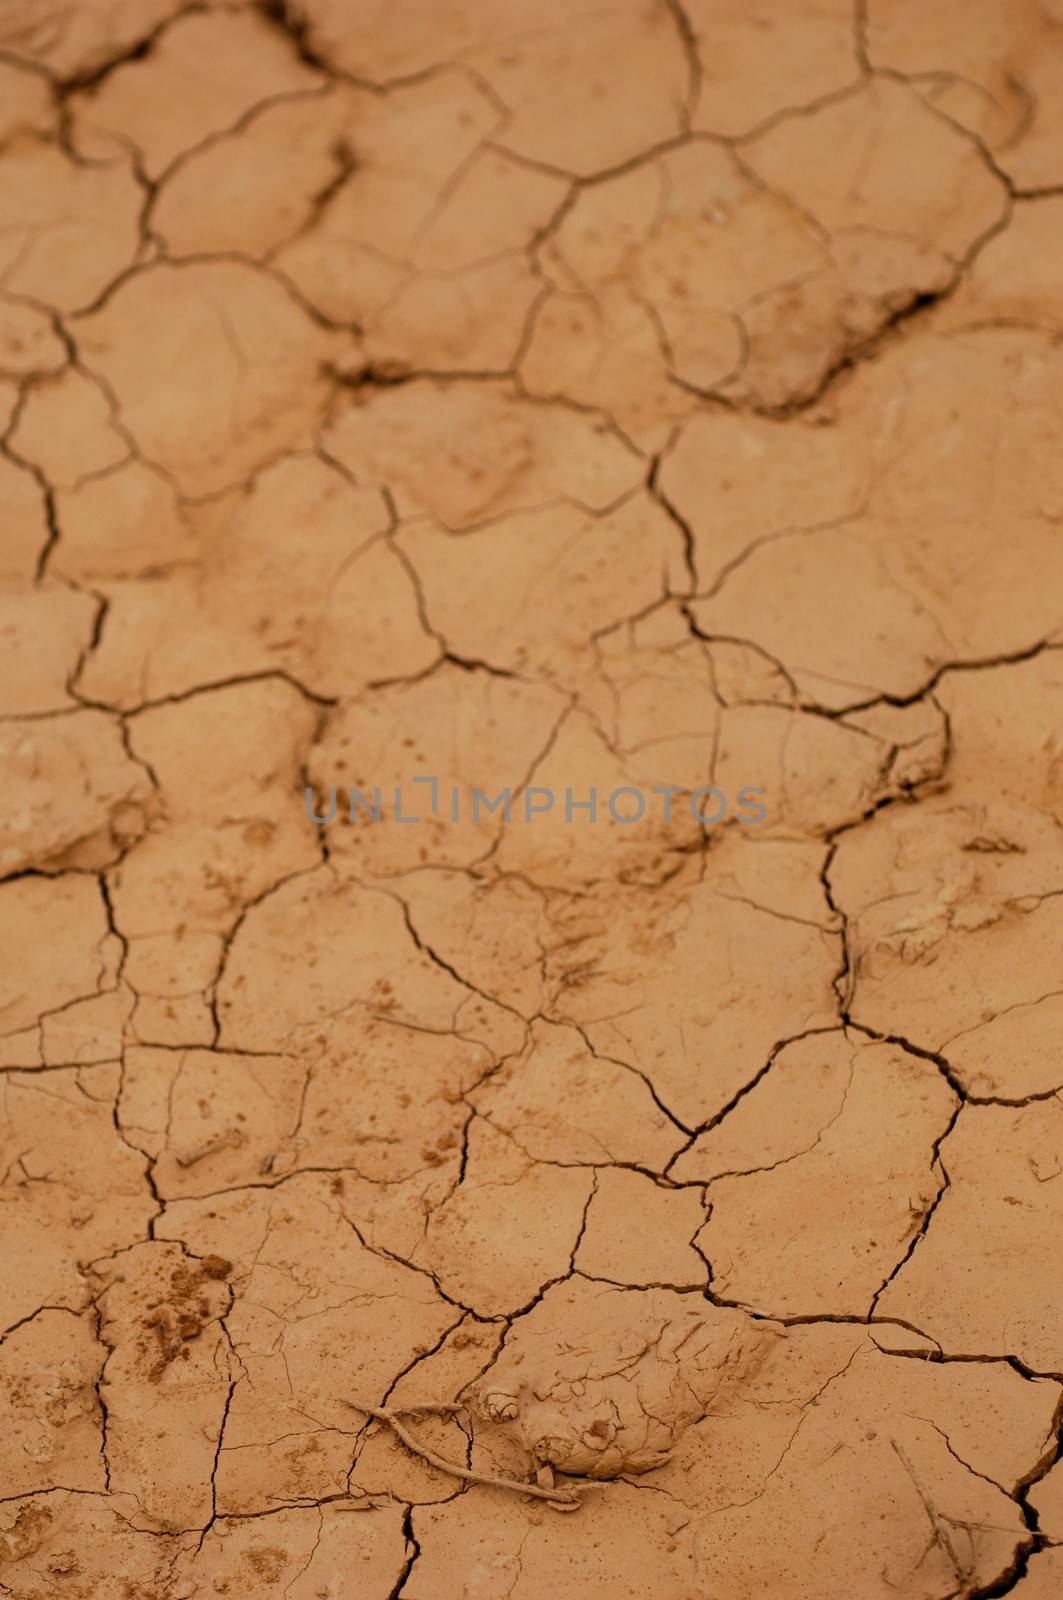 A dry water hole showing cracked mud